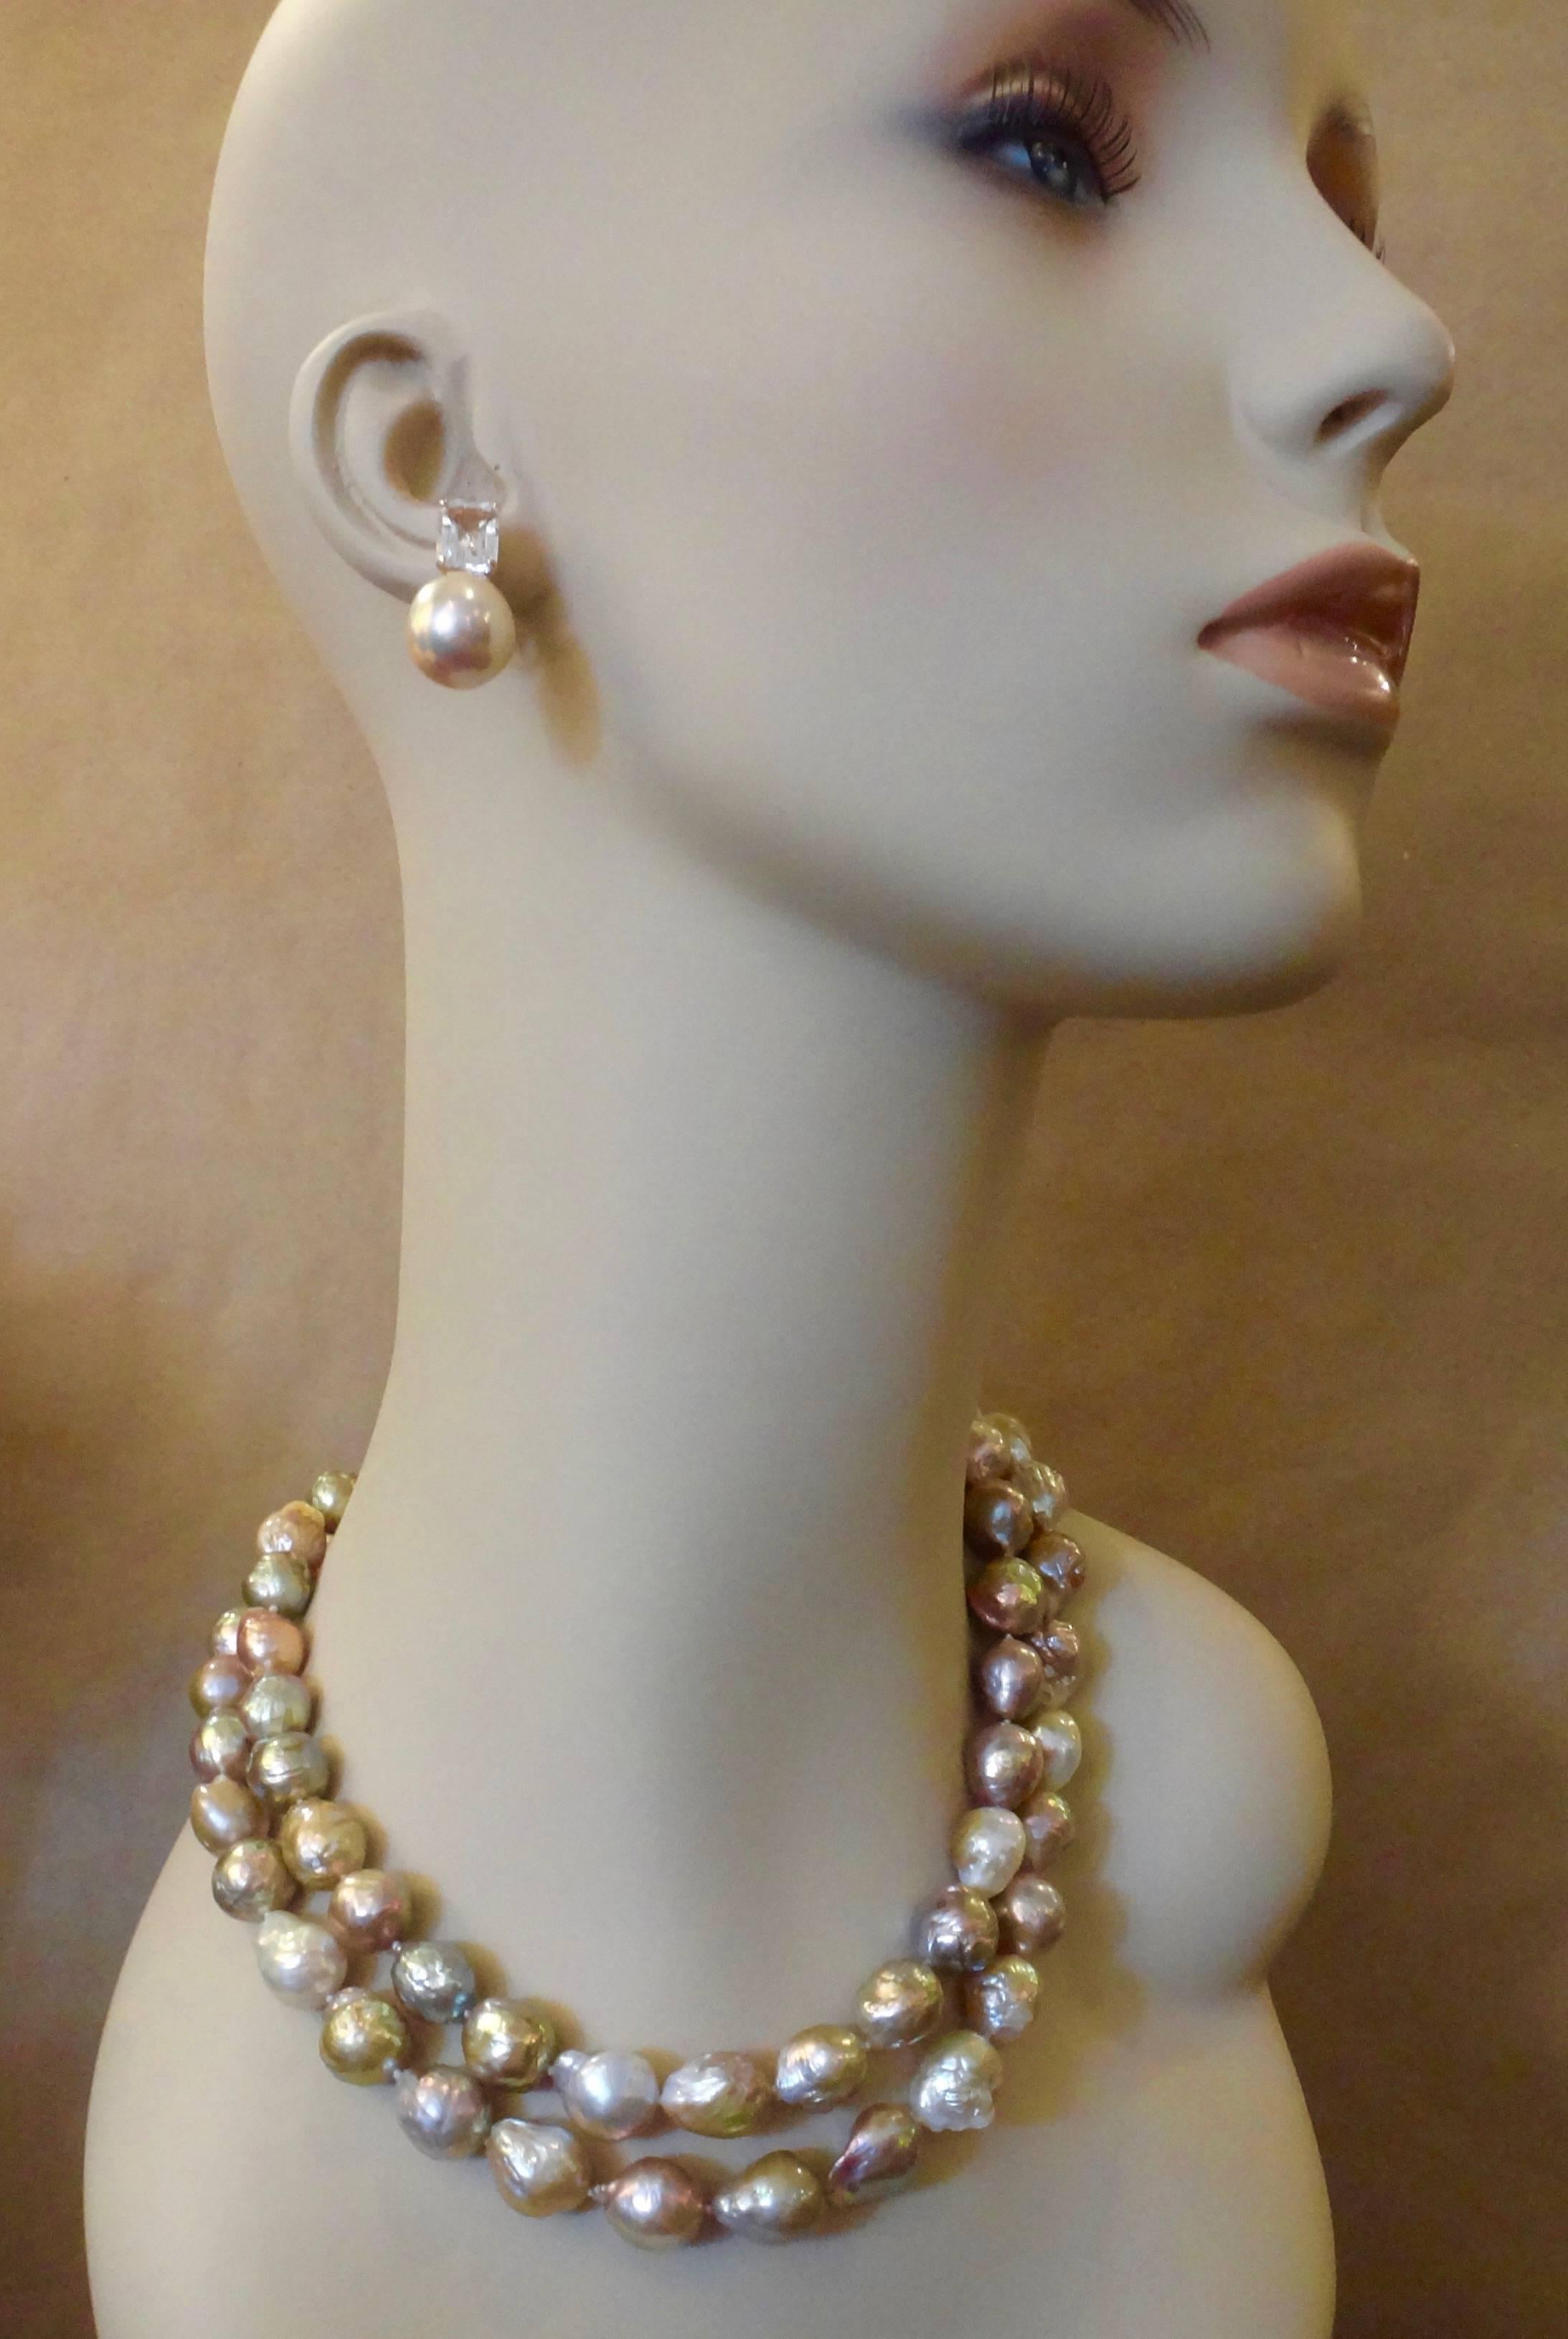 Two strands of Kasumi pearls (origin: Lake Kasumi, Japan) form this bold necklace.  Kasumi pearls are renowned for their metallic luster and rich baroque surfaces.  These multicolored strands run the full spectrum of colors including bronze, pink,